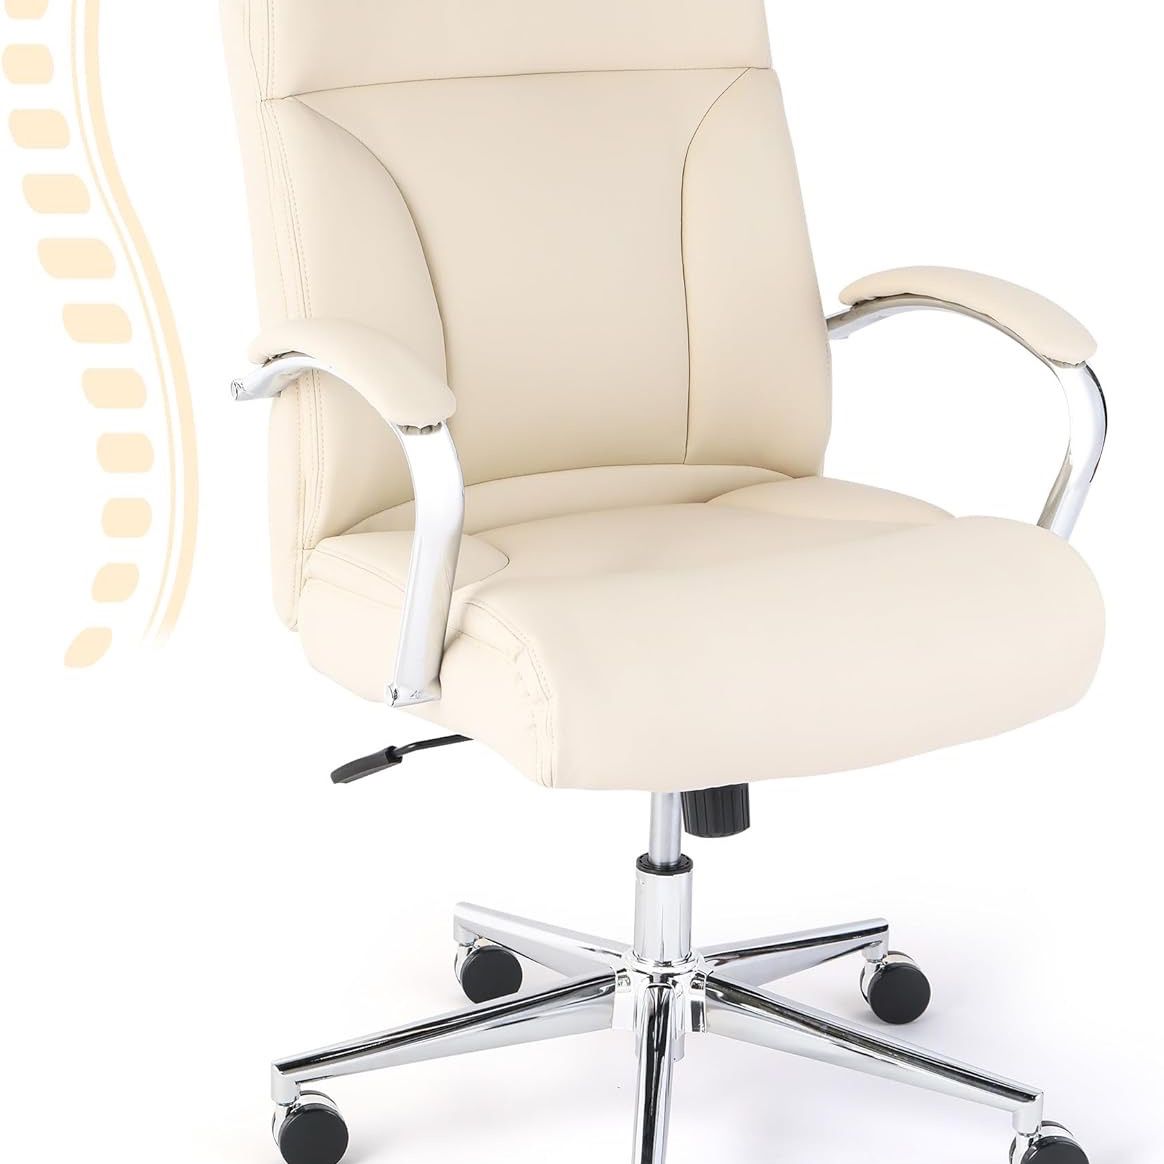 Home Office Chair Ergonomic High Back Computer Desk Chair with Arm Rests Swivel Rolling Chair for Adult Working Study (White)